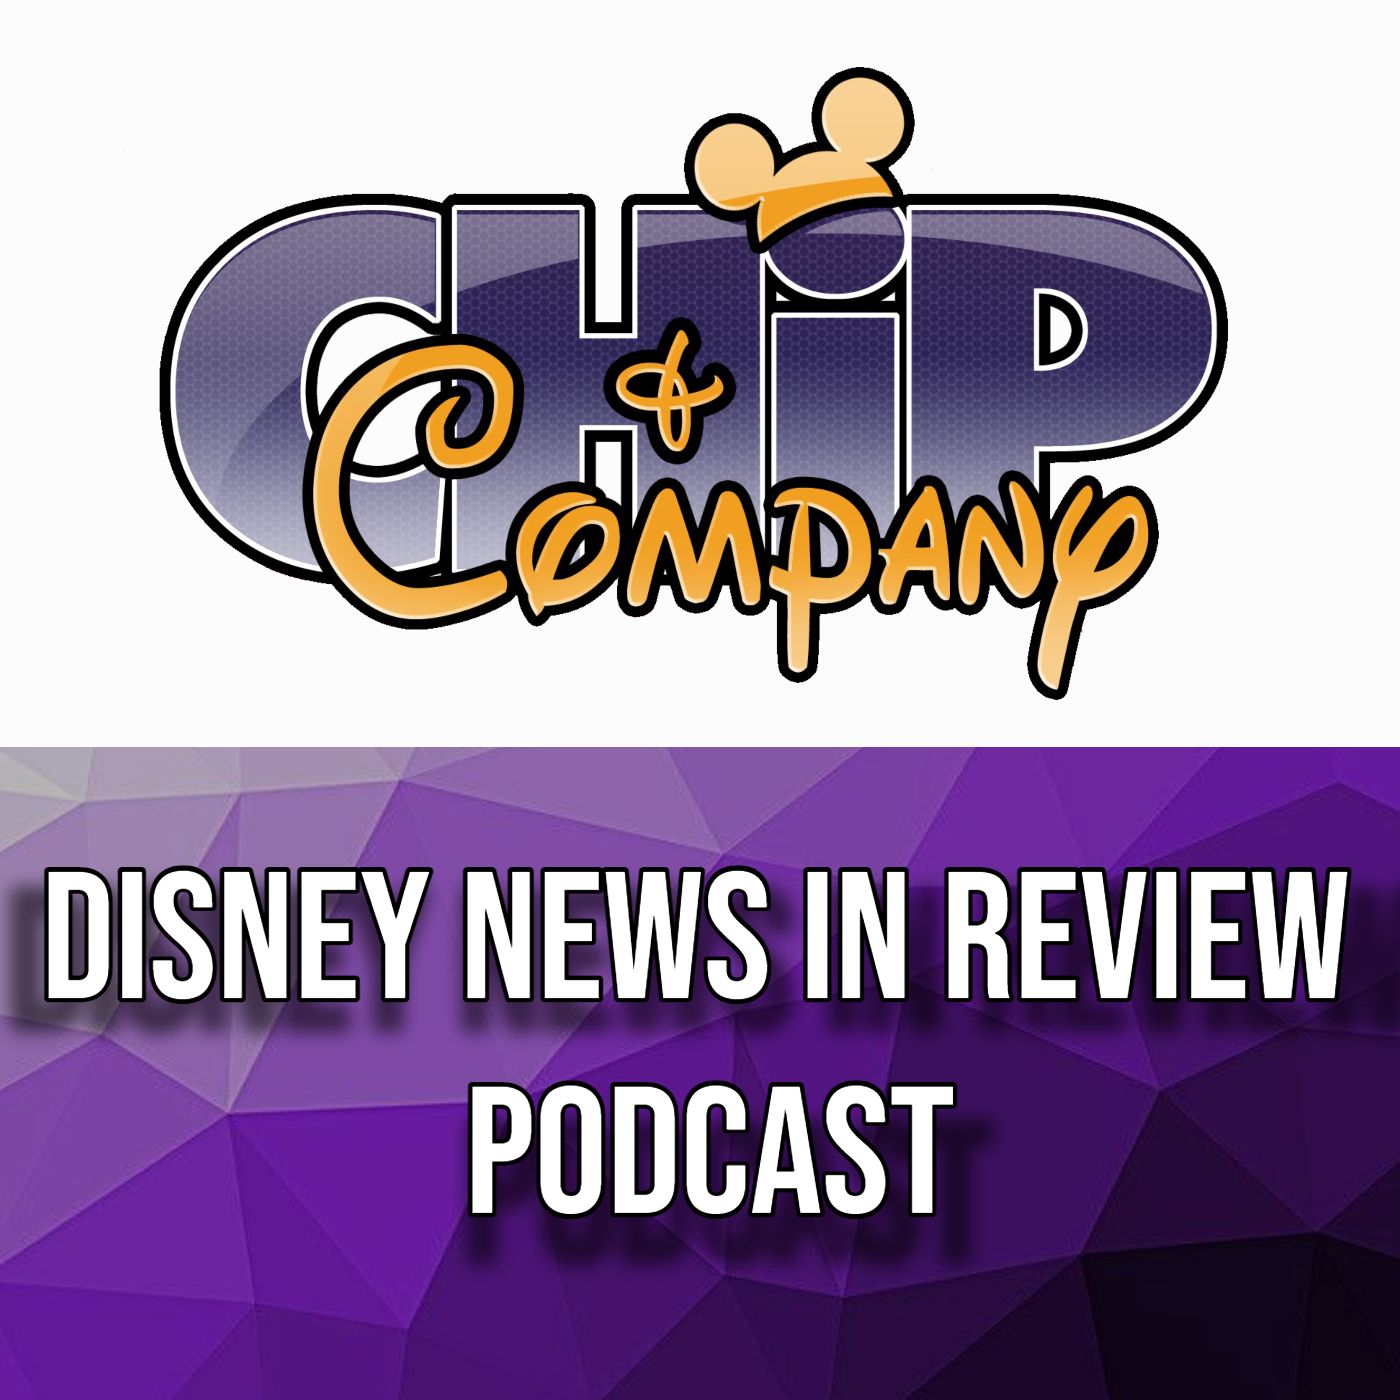 Disney News in Review - Epcot Food & Wine, Tower of Terror Billboard Removal and More Image